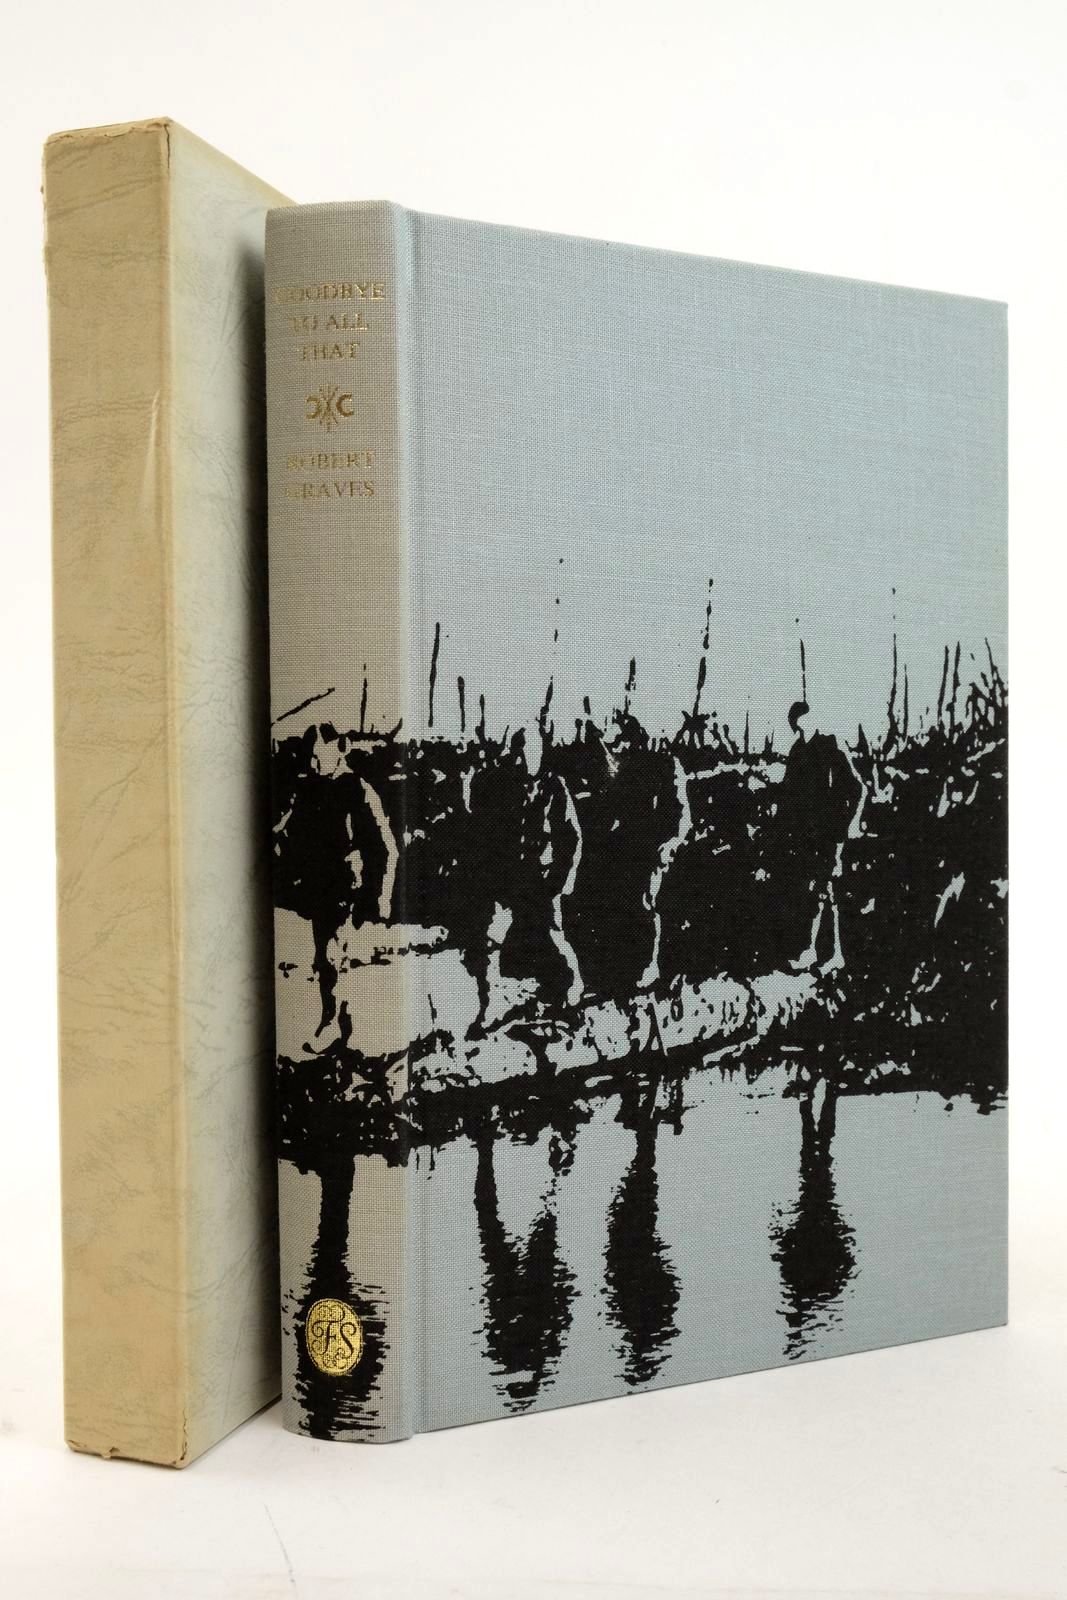 Photo of GOODBYE TO ALL THAT written by Graves, Robert Trevelyan, Raleigh published by Folio Society (STOCK CODE: 2138272)  for sale by Stella & Rose's Books